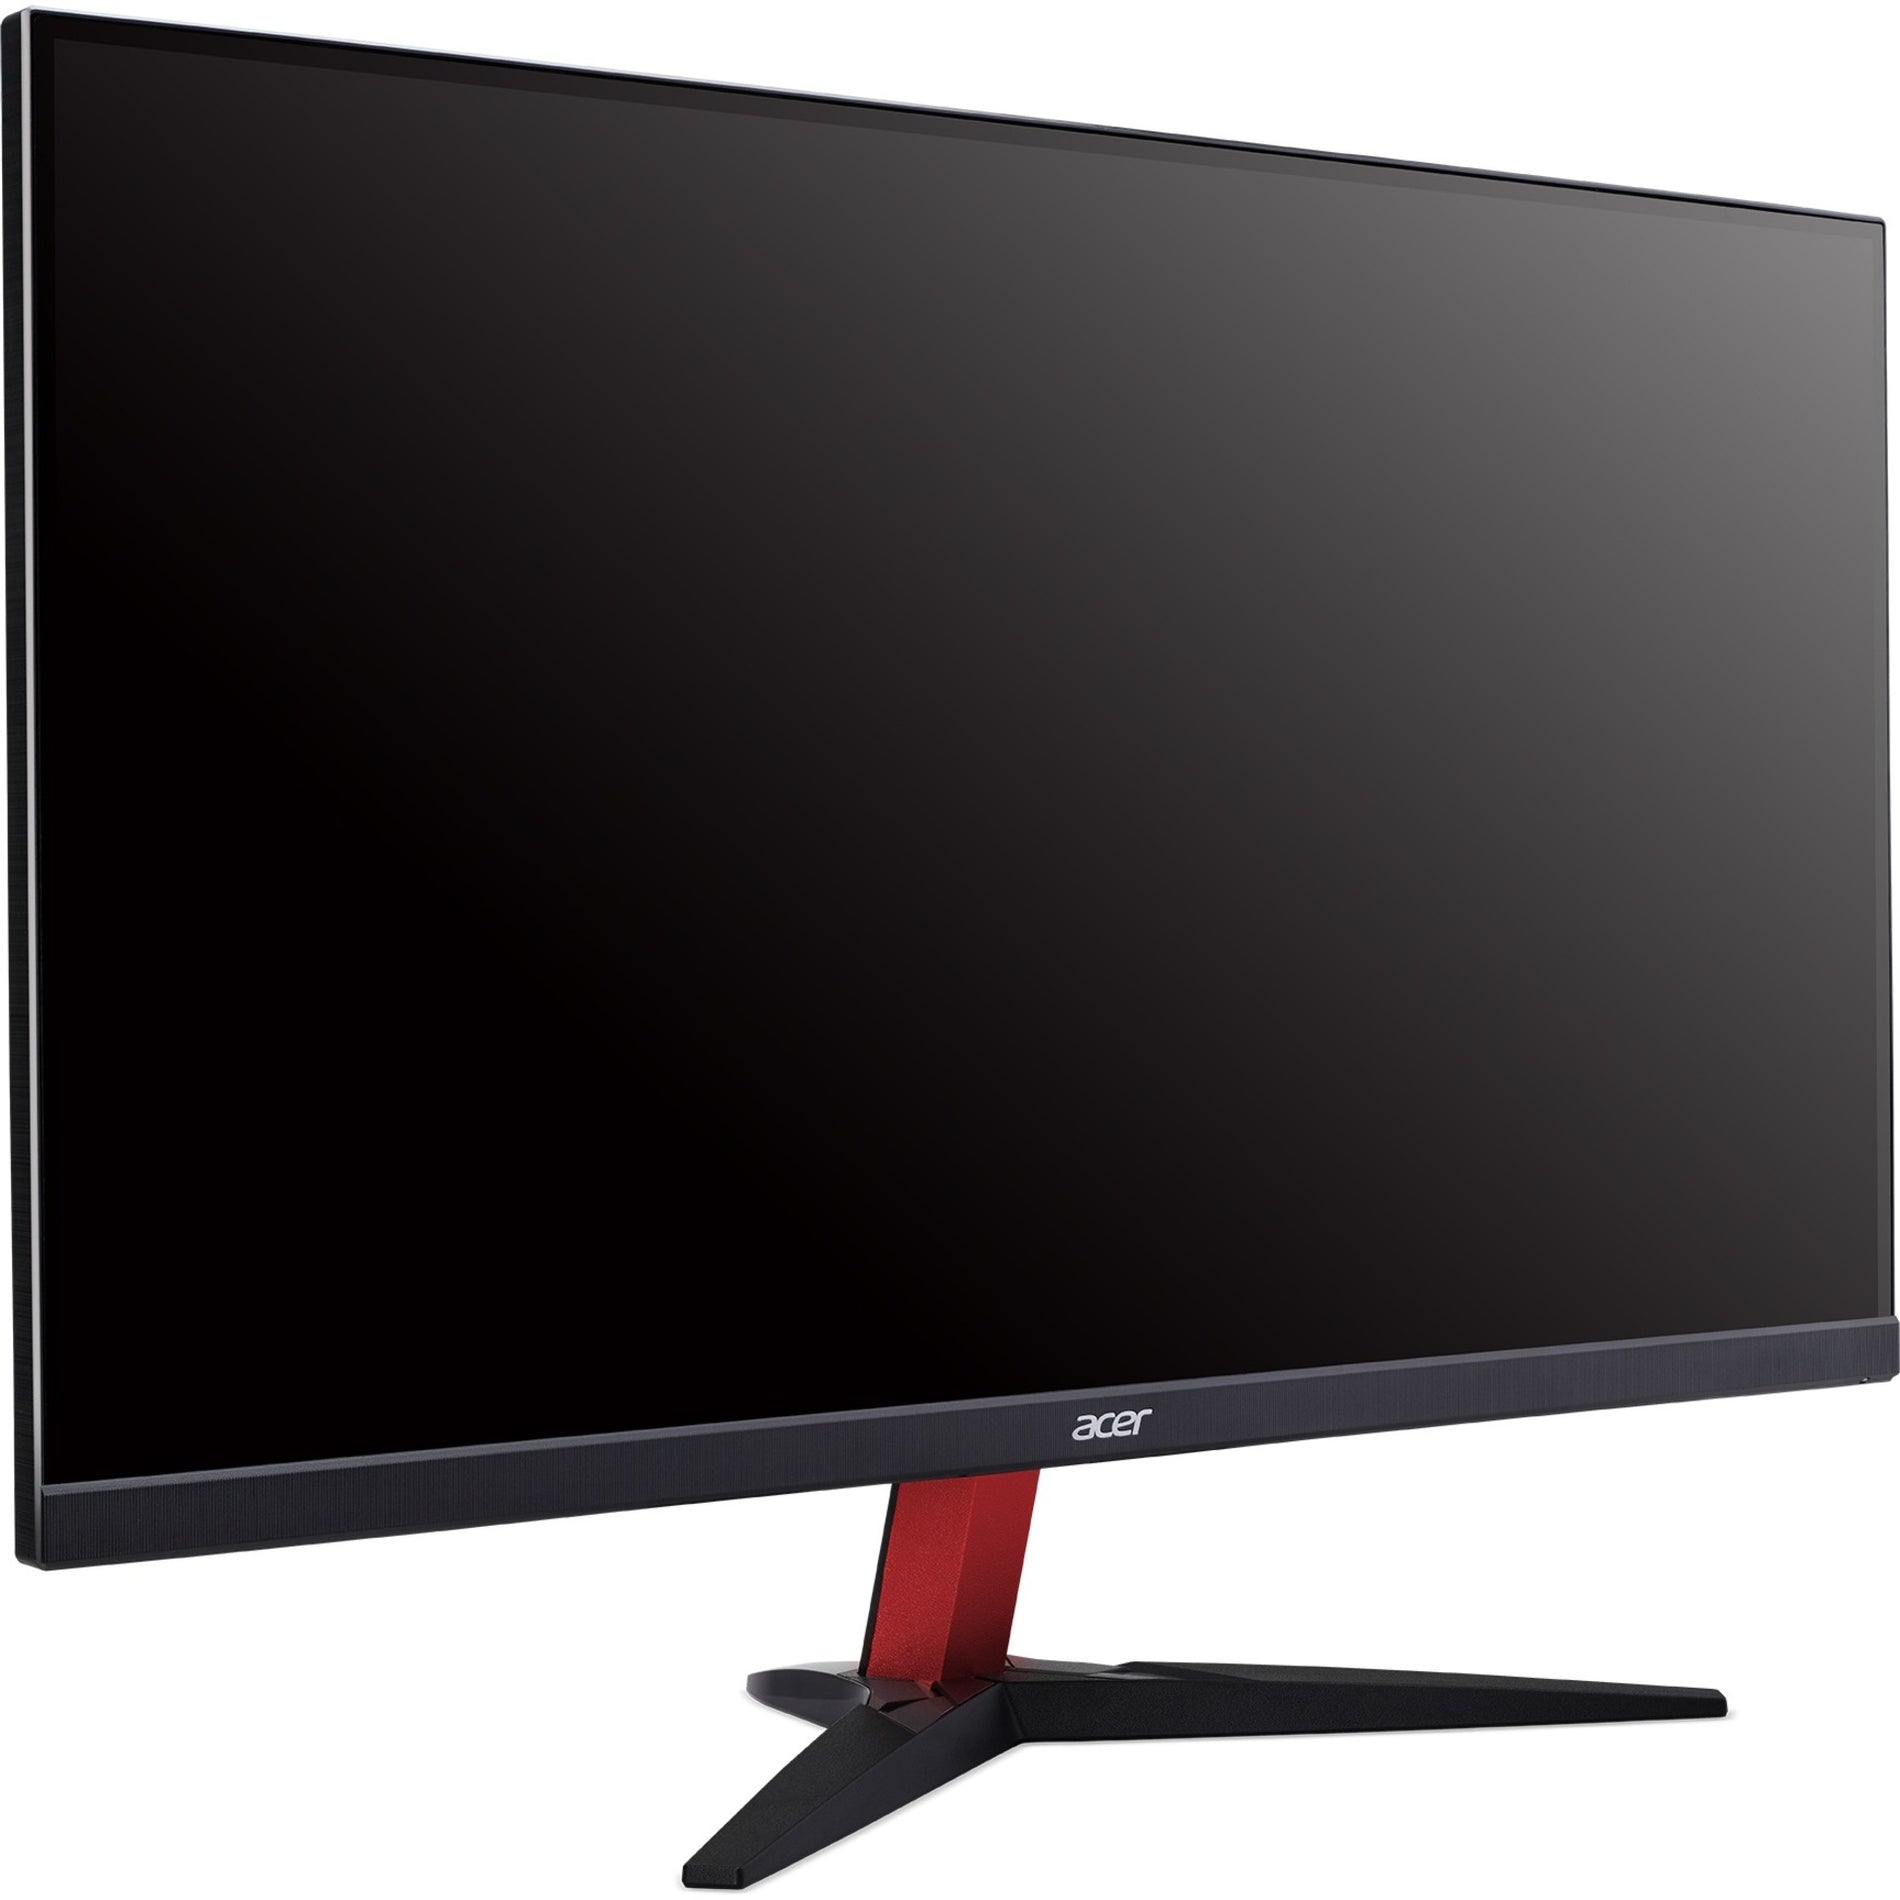 Acer KG272 S 27" Full HD LCD Monitor - Black [Discontinued]